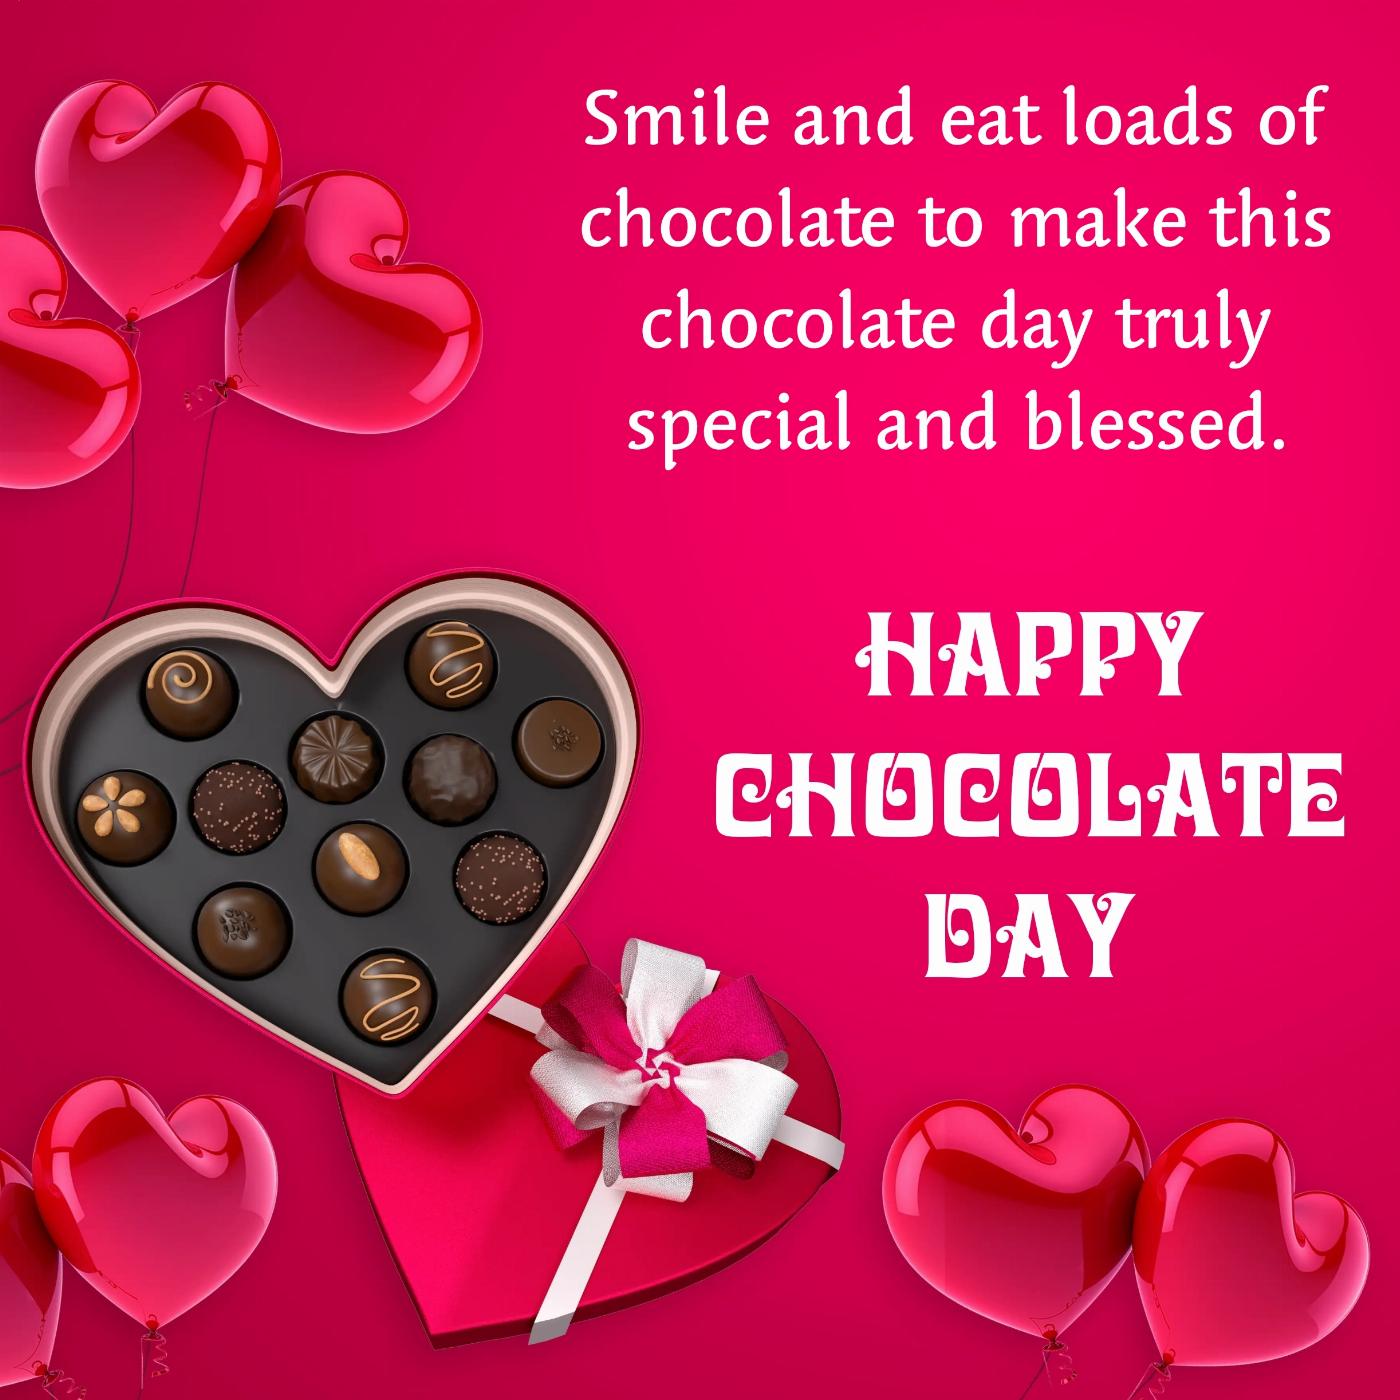 Smile and eat loads of chocolate to make this chocolate day